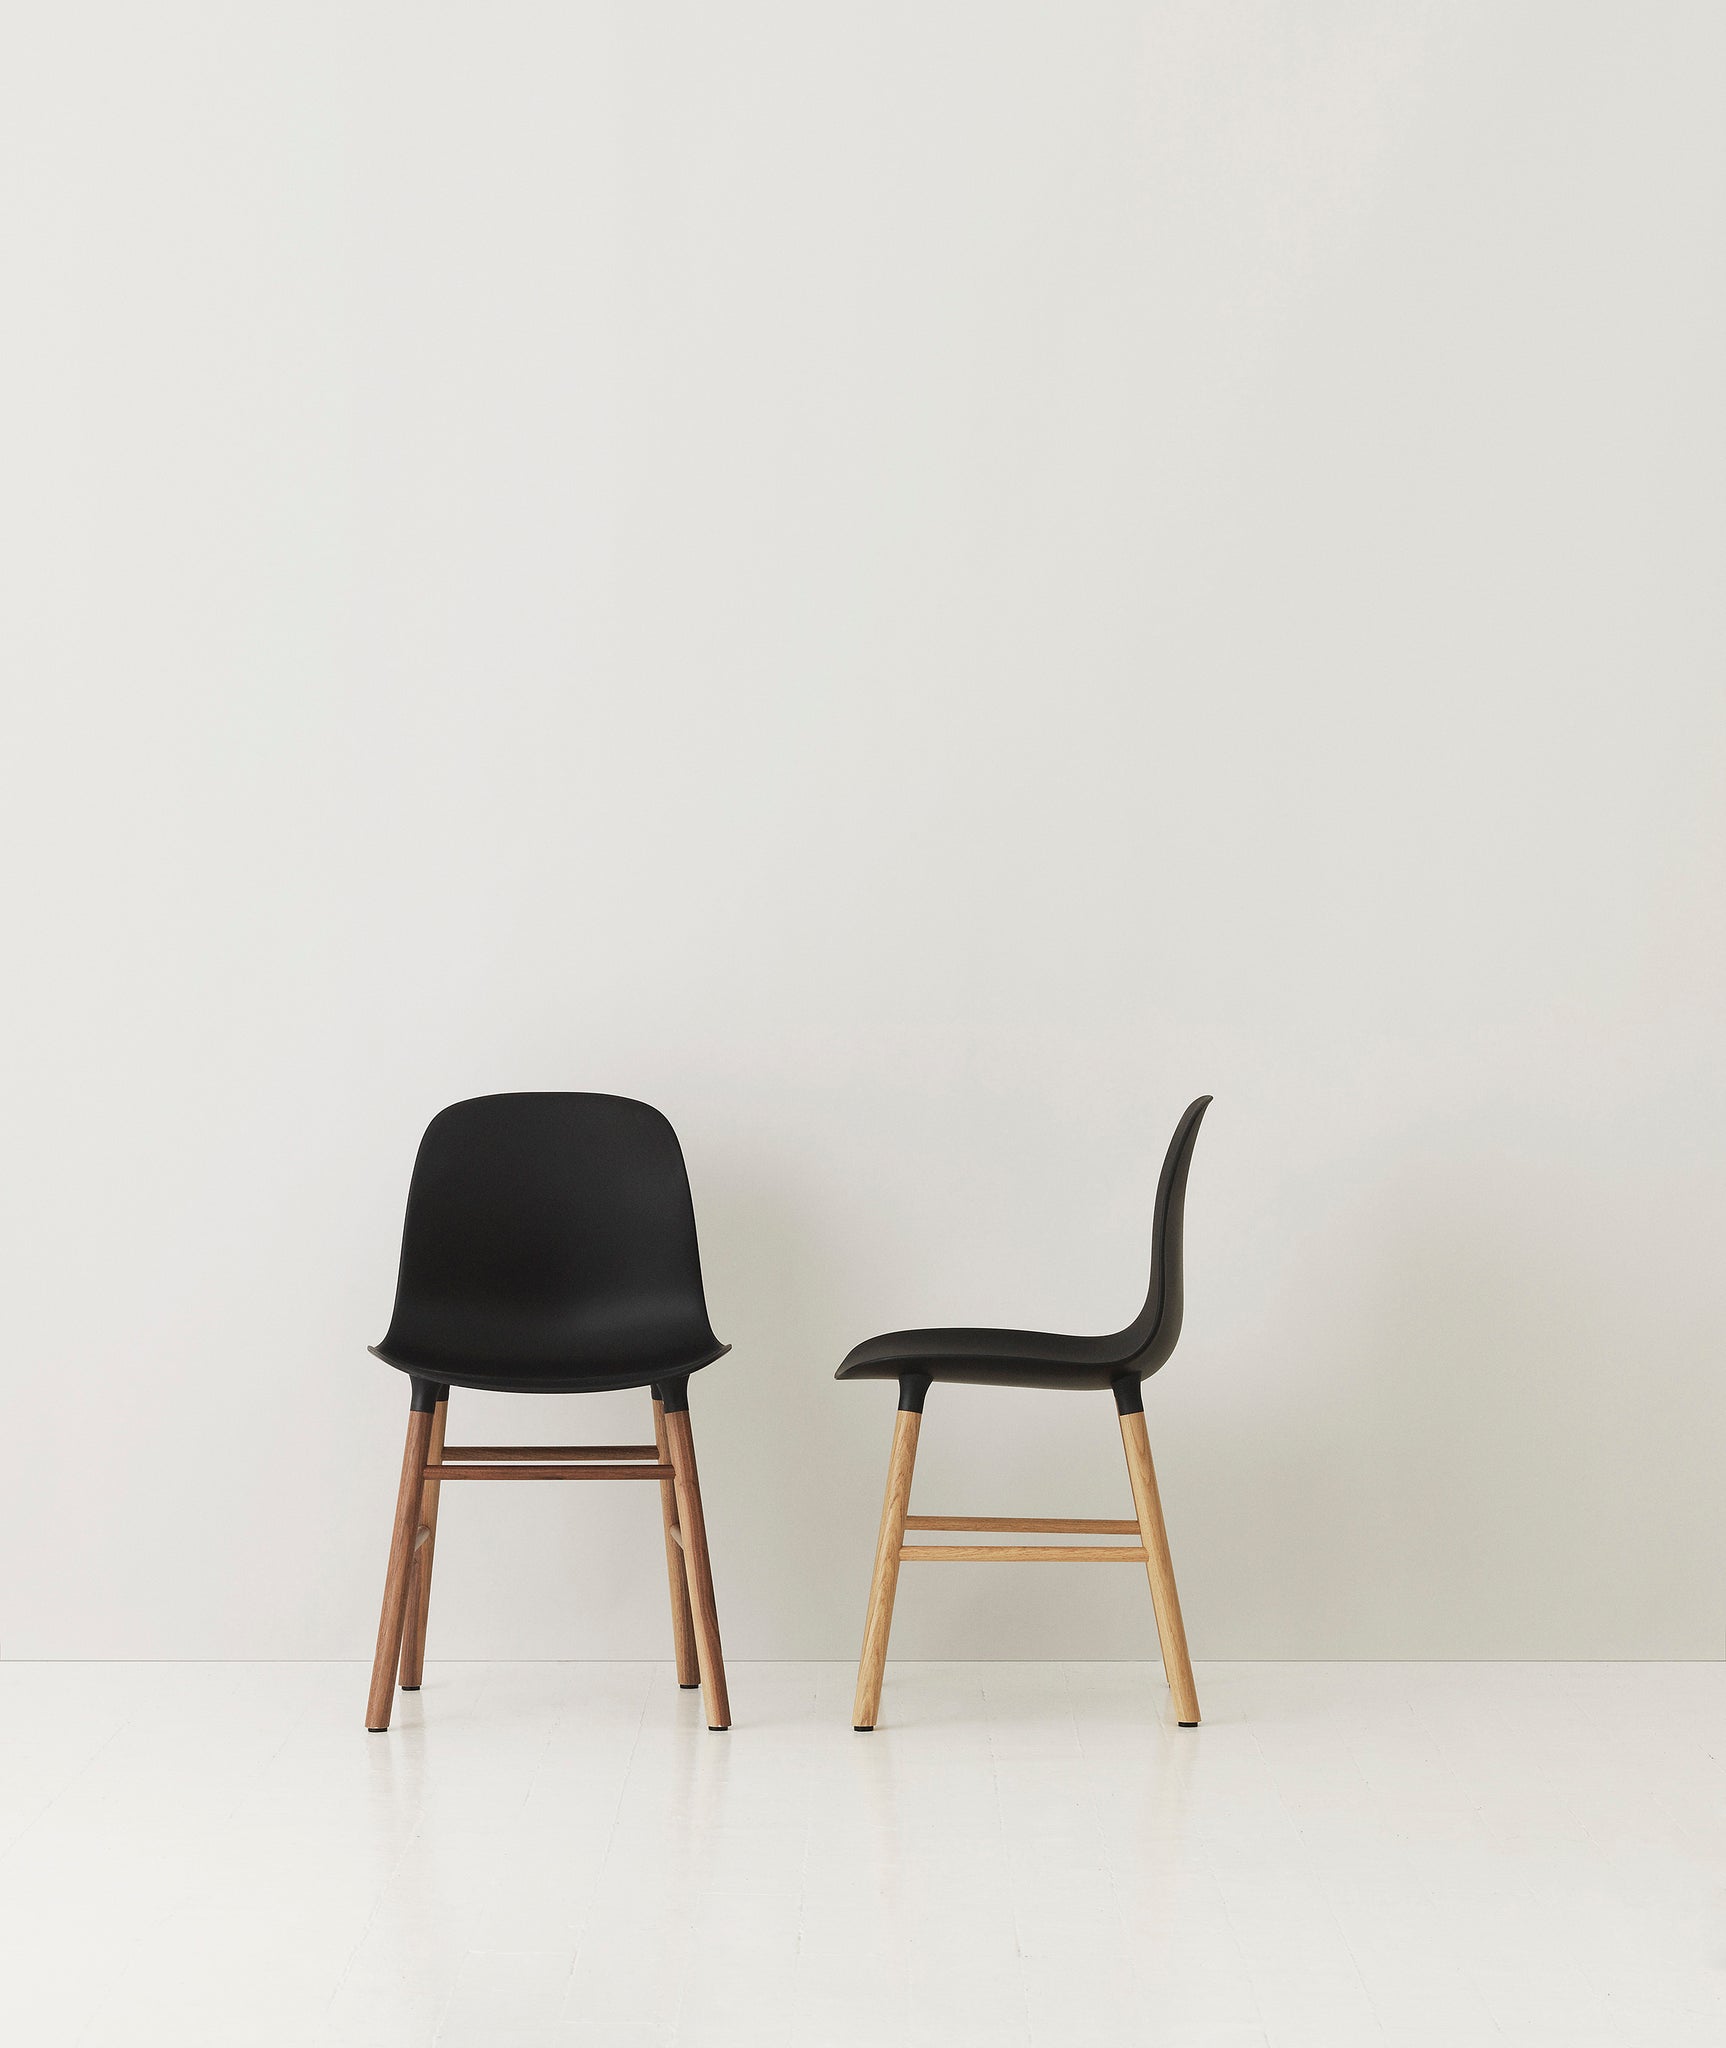 Form Dining Chair Wood - More Options